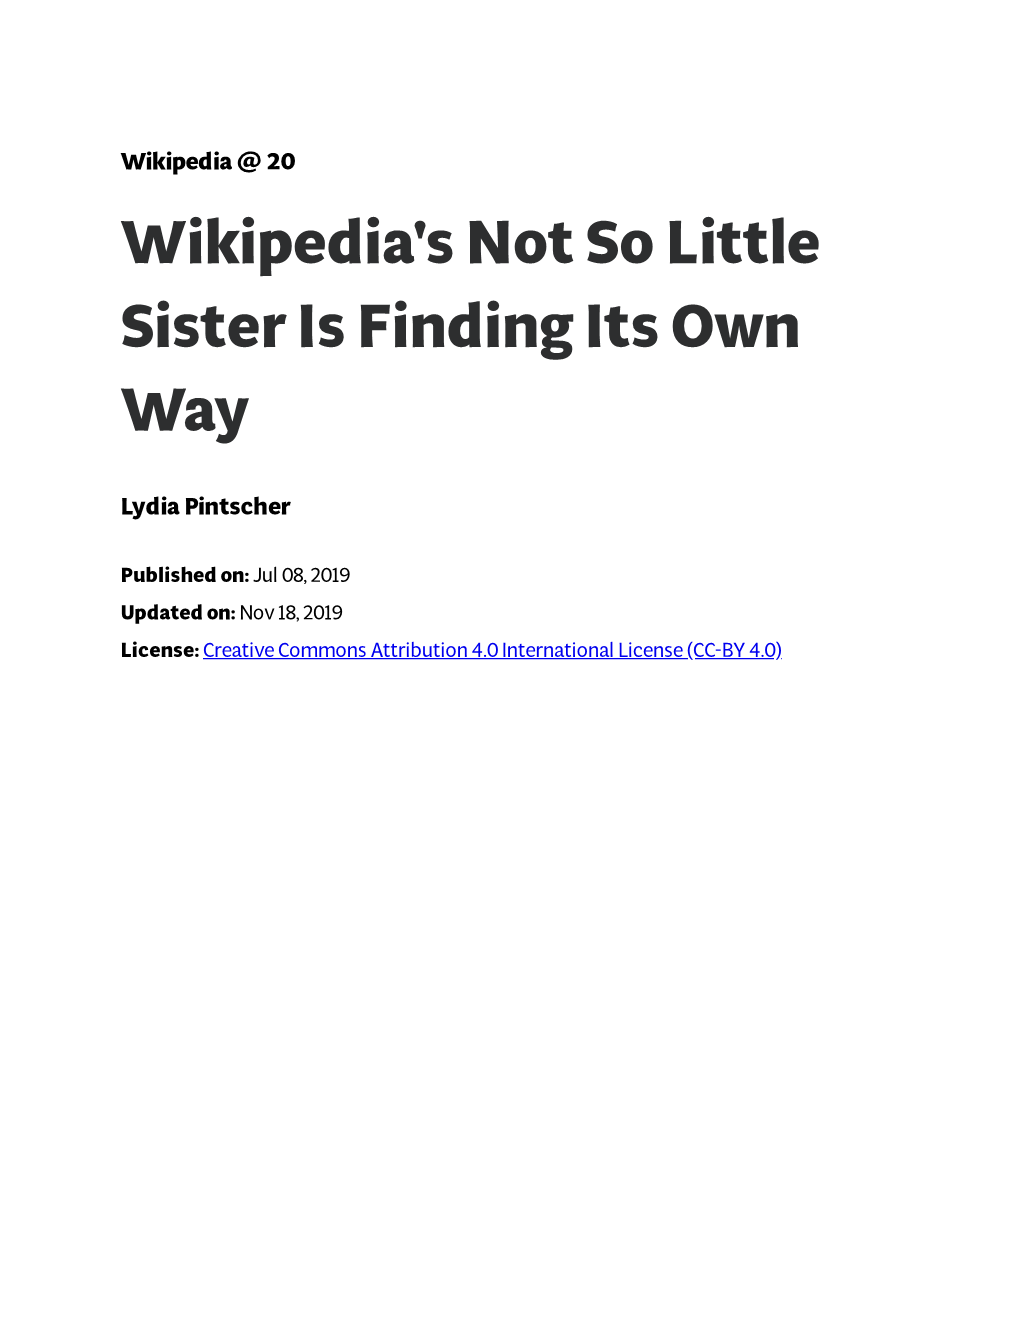 Wikipedia's Not So Little Sister Is Finding Its Own Way